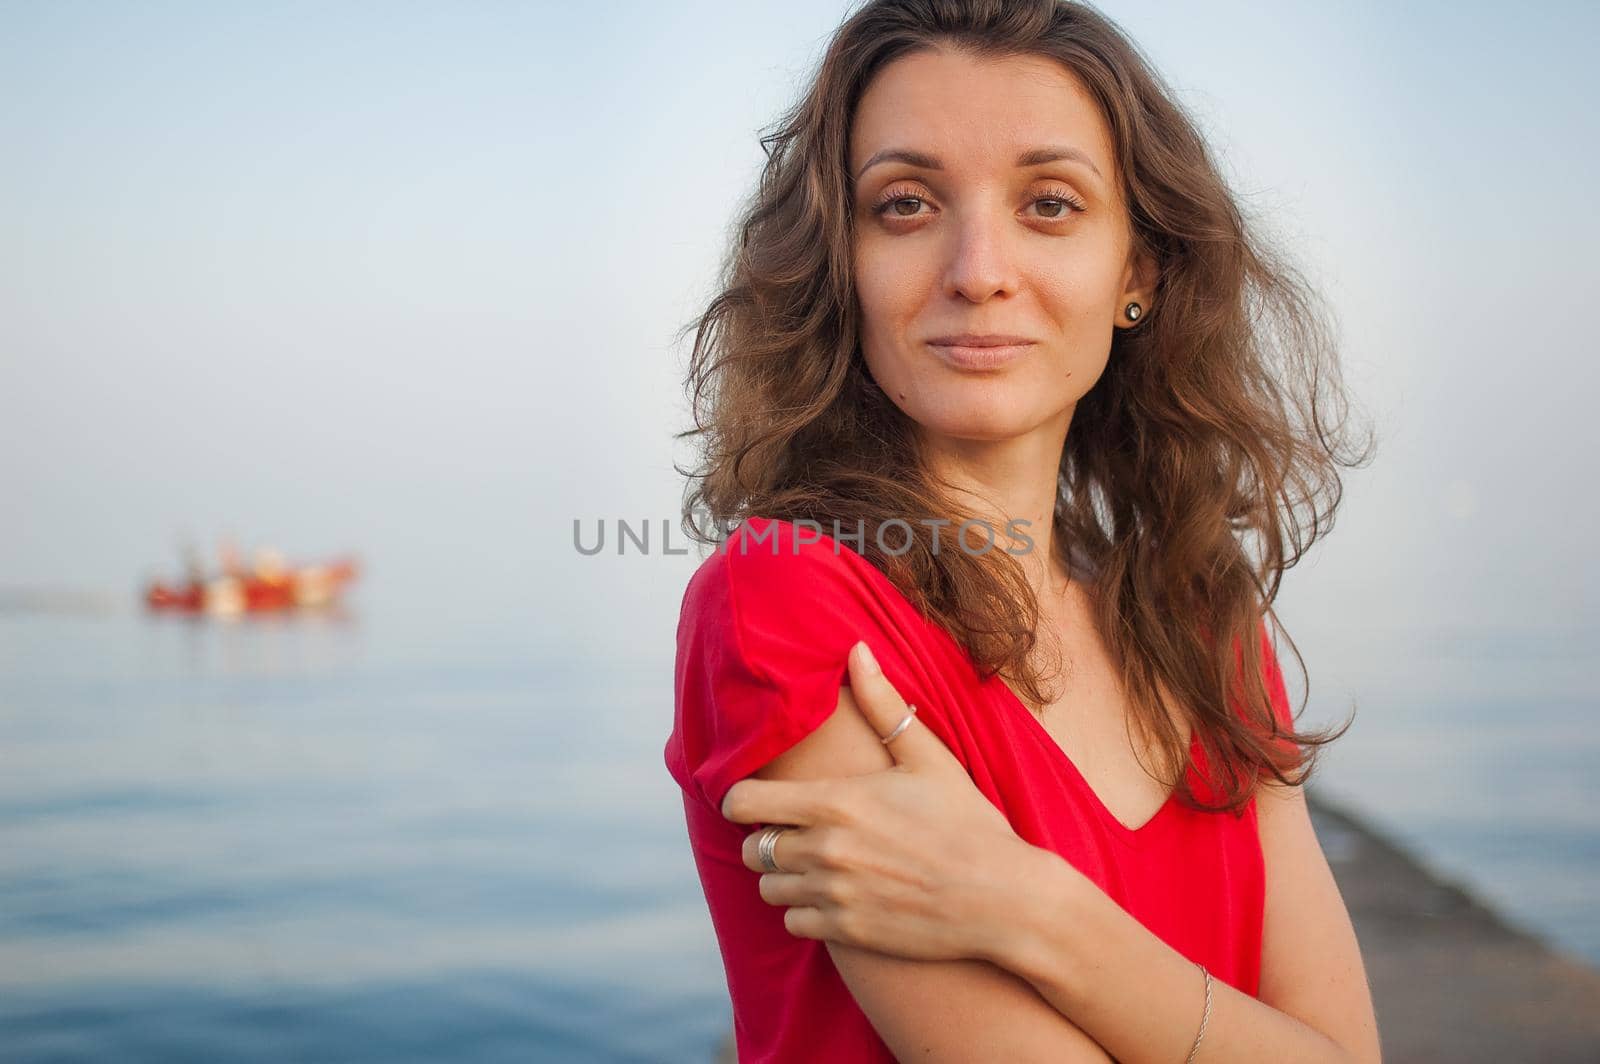 Young girl in red dress on the sea and blue background, summertime, travelling concepts.